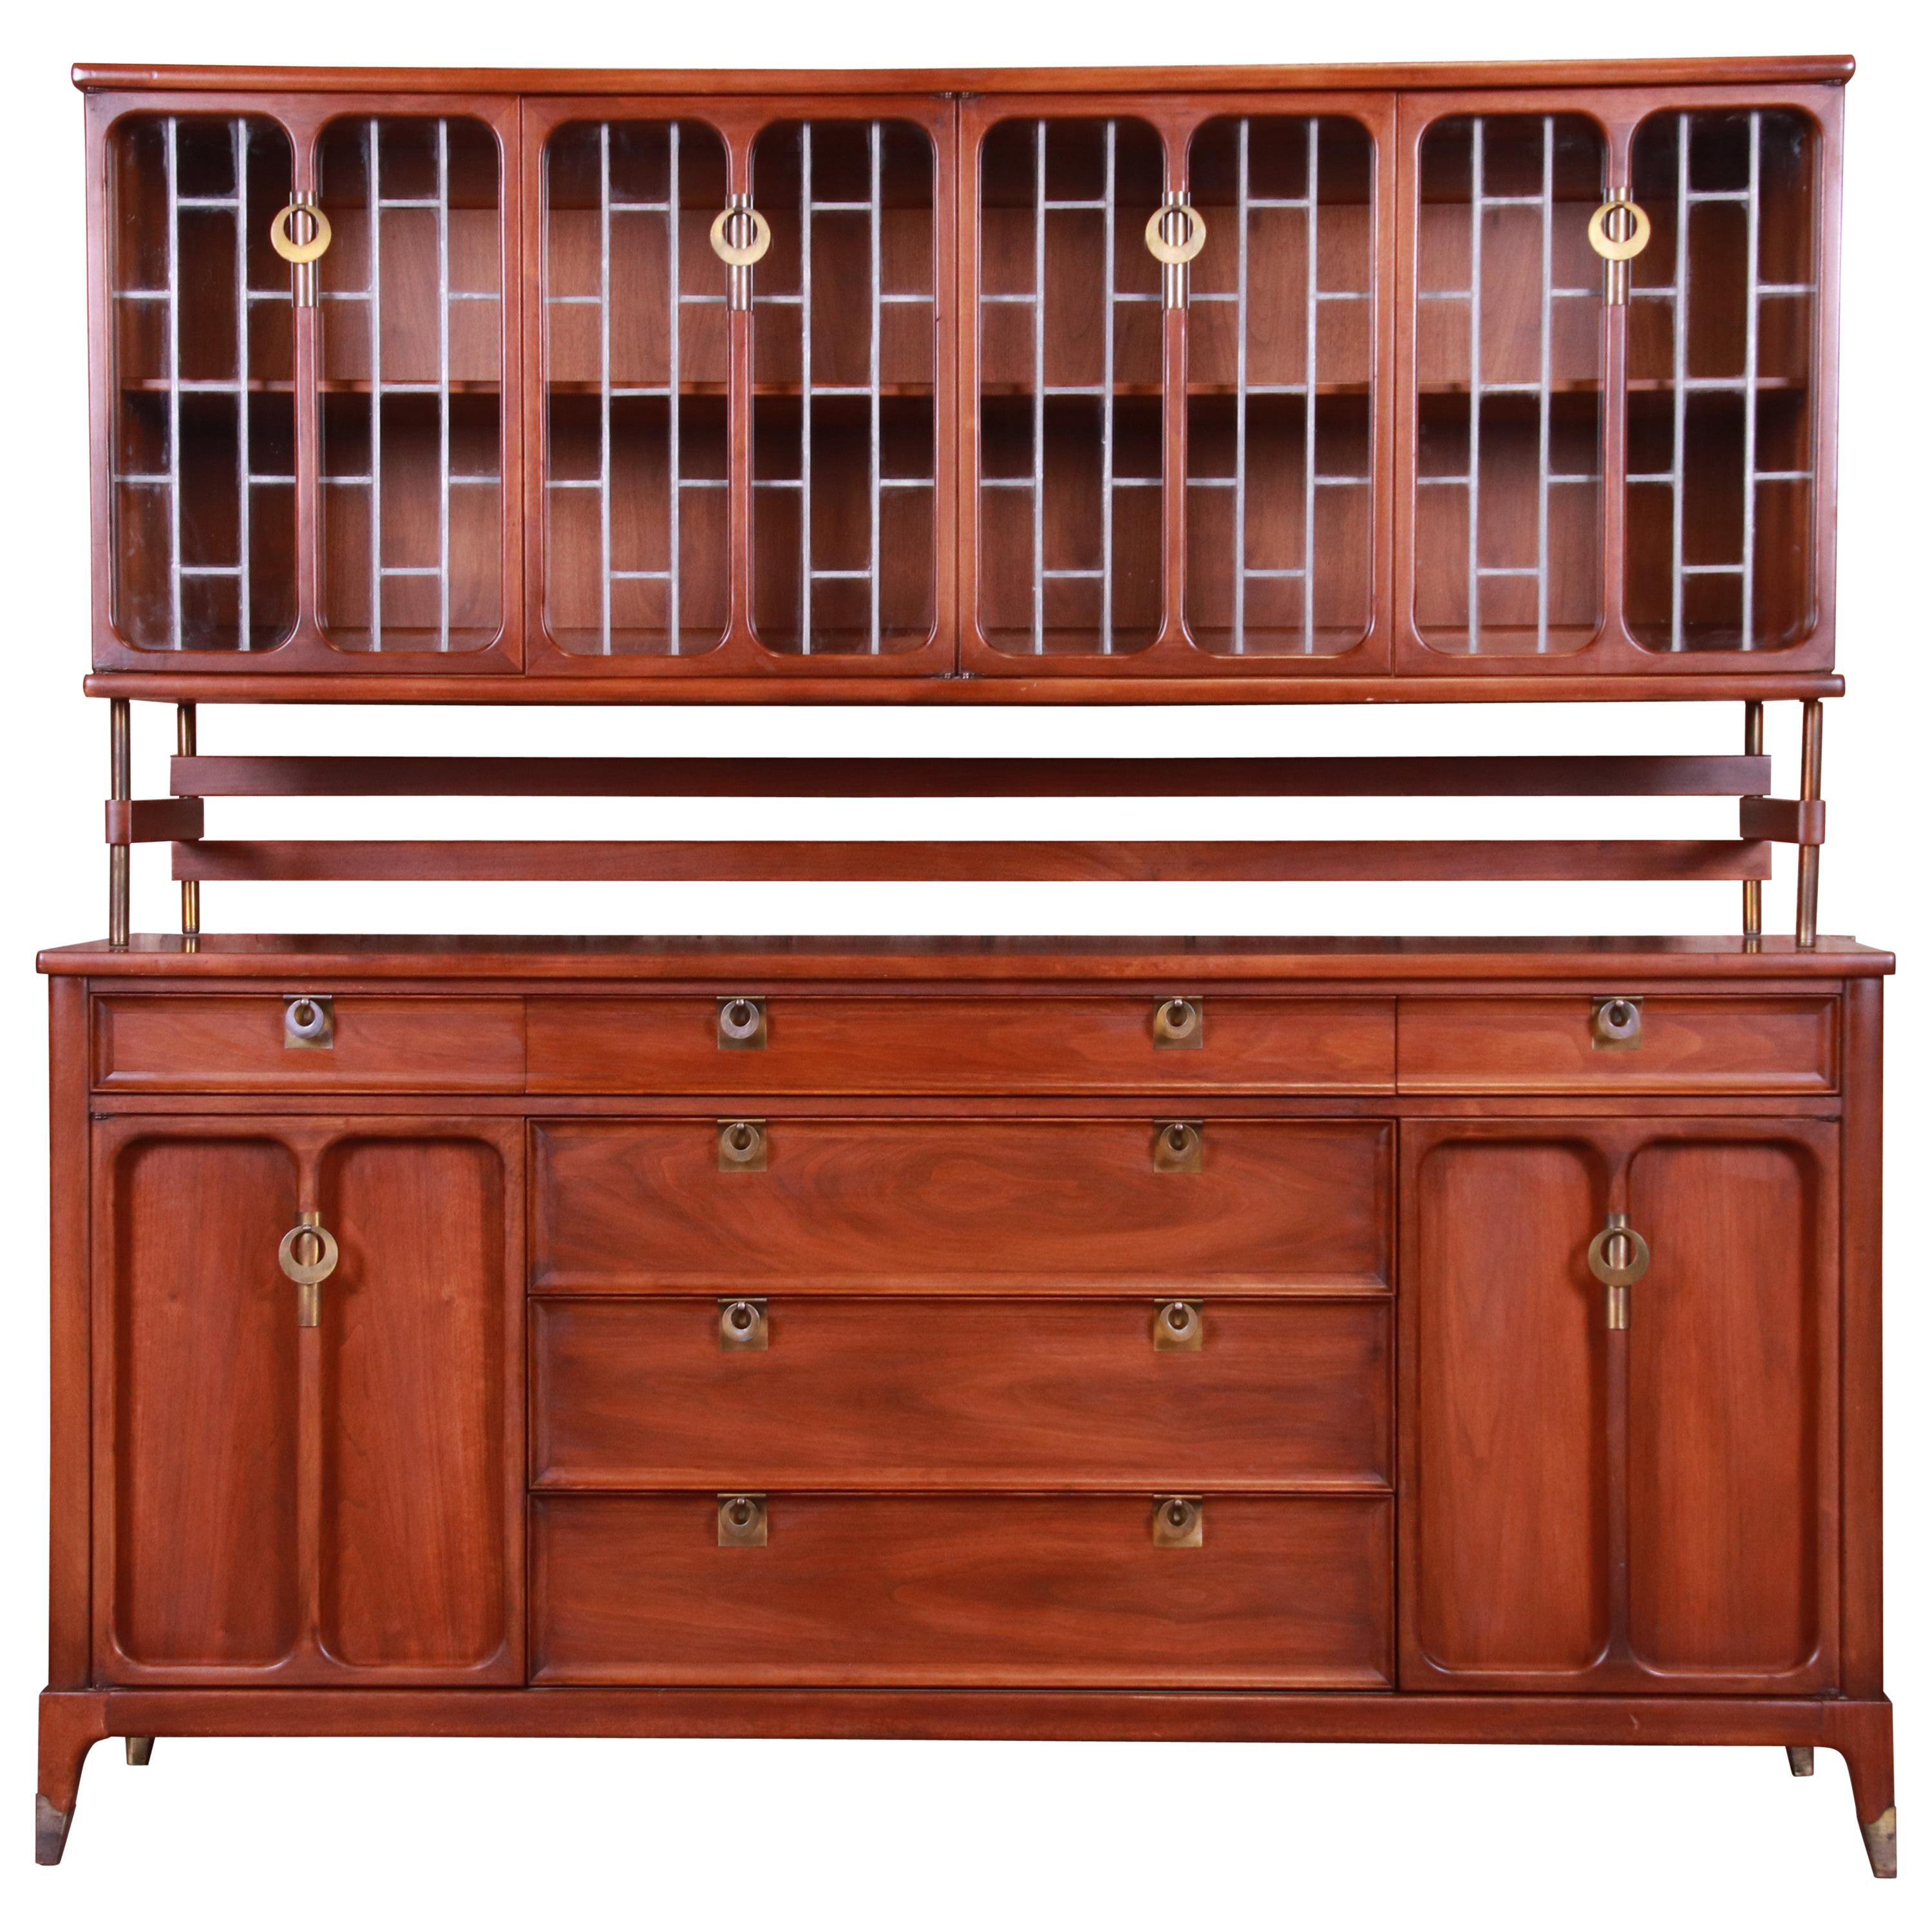 Mid-Century Modern Walnut Sideboard with Leaded Glass Hutch by White Furniture